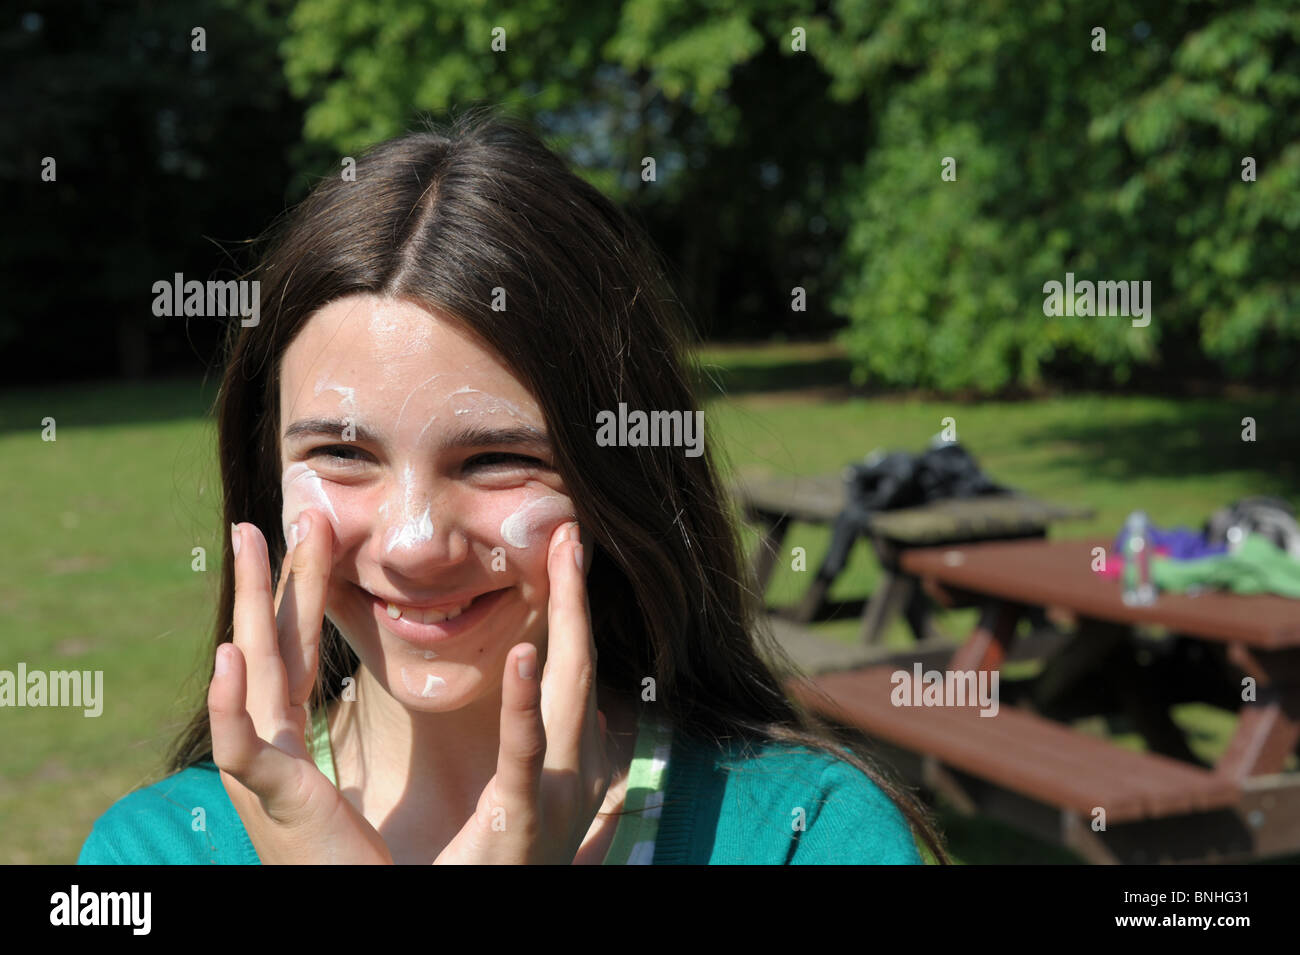 Girl happily applying suncream to protect her face from sunburn in a park on a hot sunny day Stock Photo